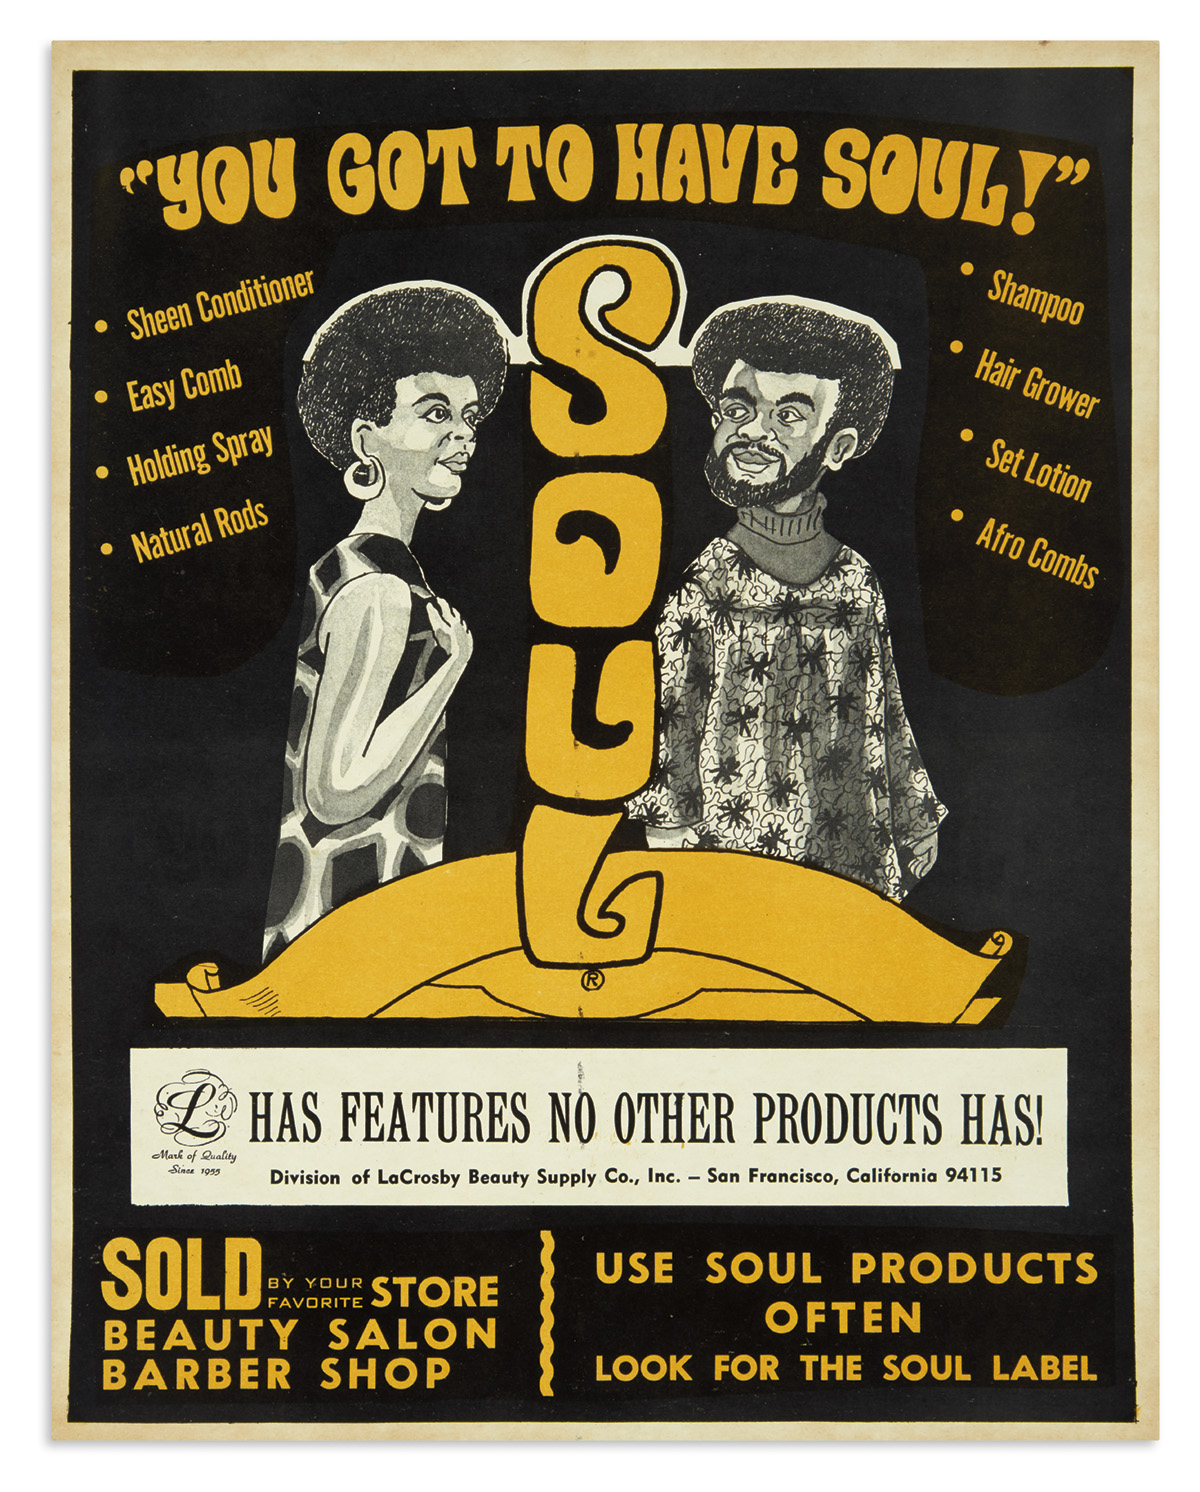 (BEAUTY.) You Got to Have Soul . . . Use Soul Products Often, Look for the Soul Label.